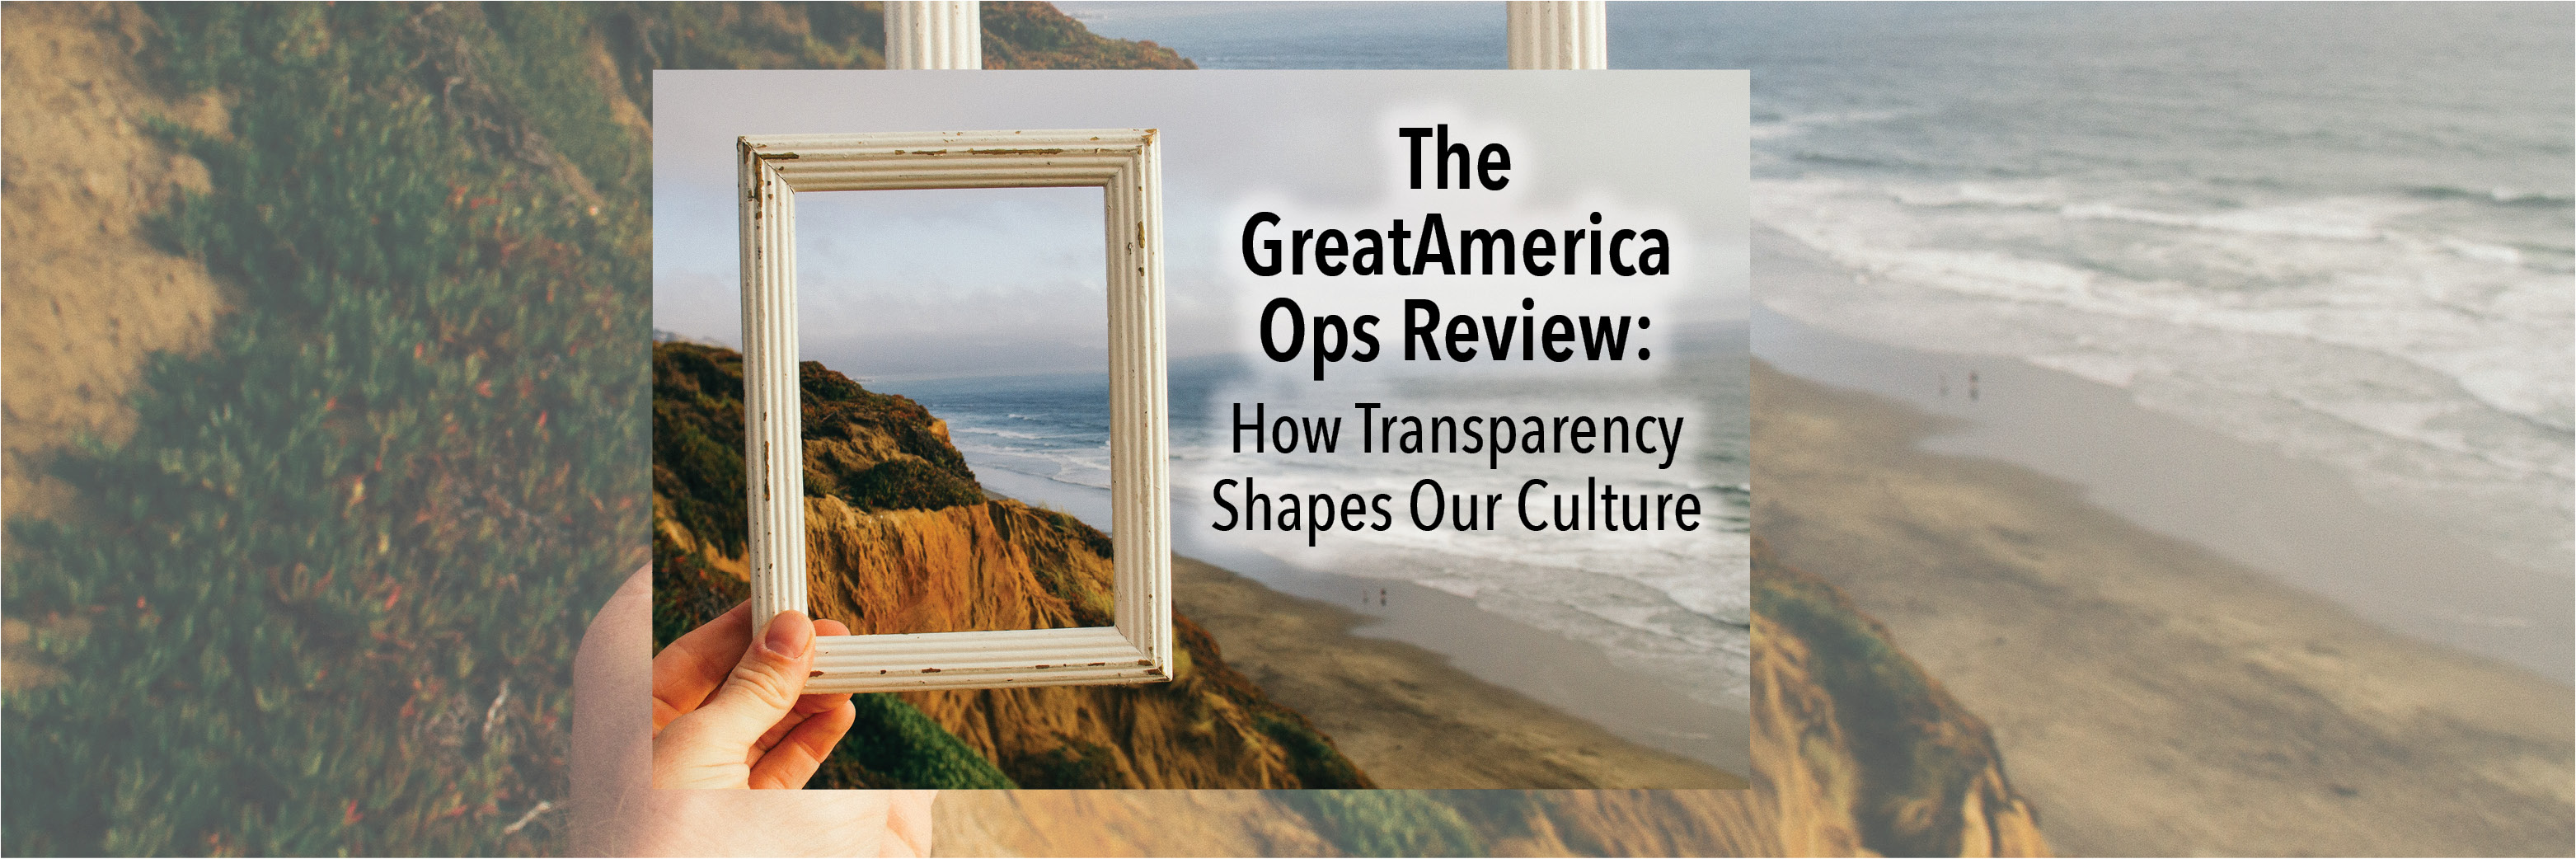 The GreatAmerica Ops Review: How Transparency Shapes Our Culture